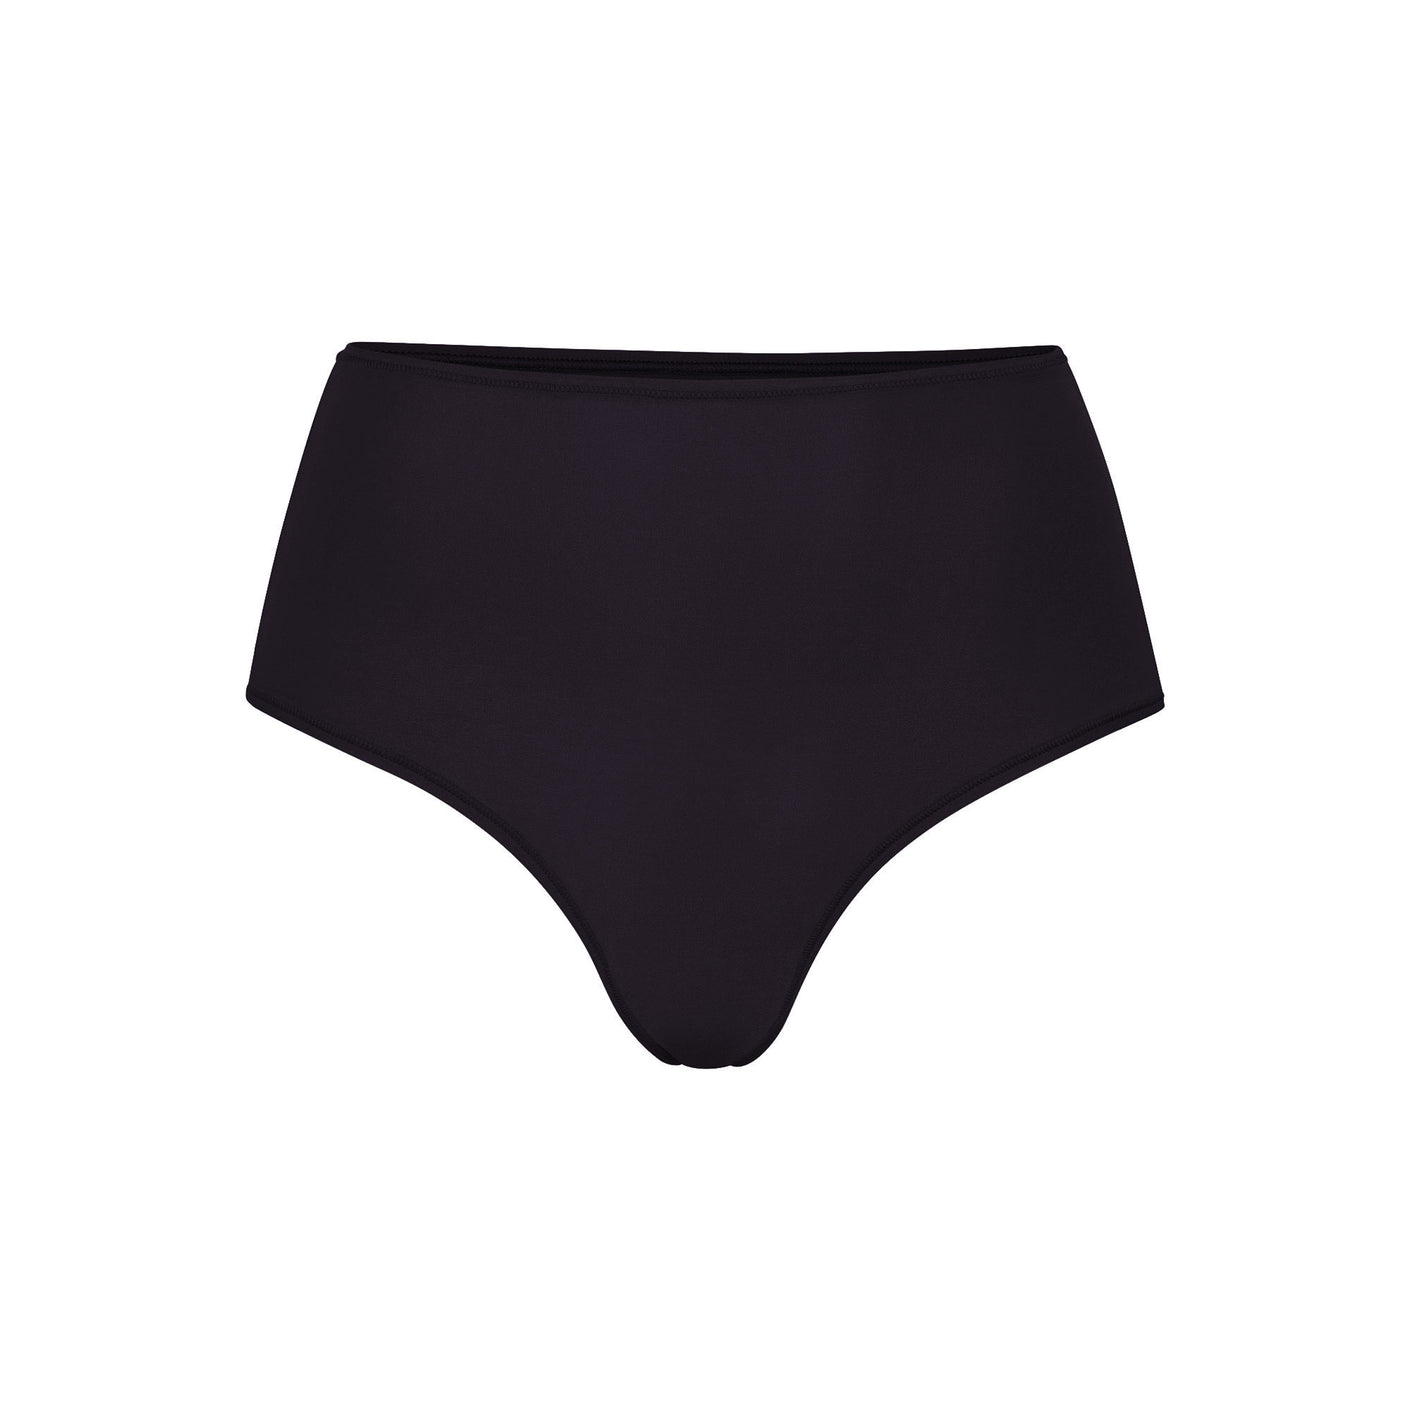 NWT~ SKIMS Kim K Thong / Color: Onyx/ Size M/ Style: (PN-DTH-2027) 